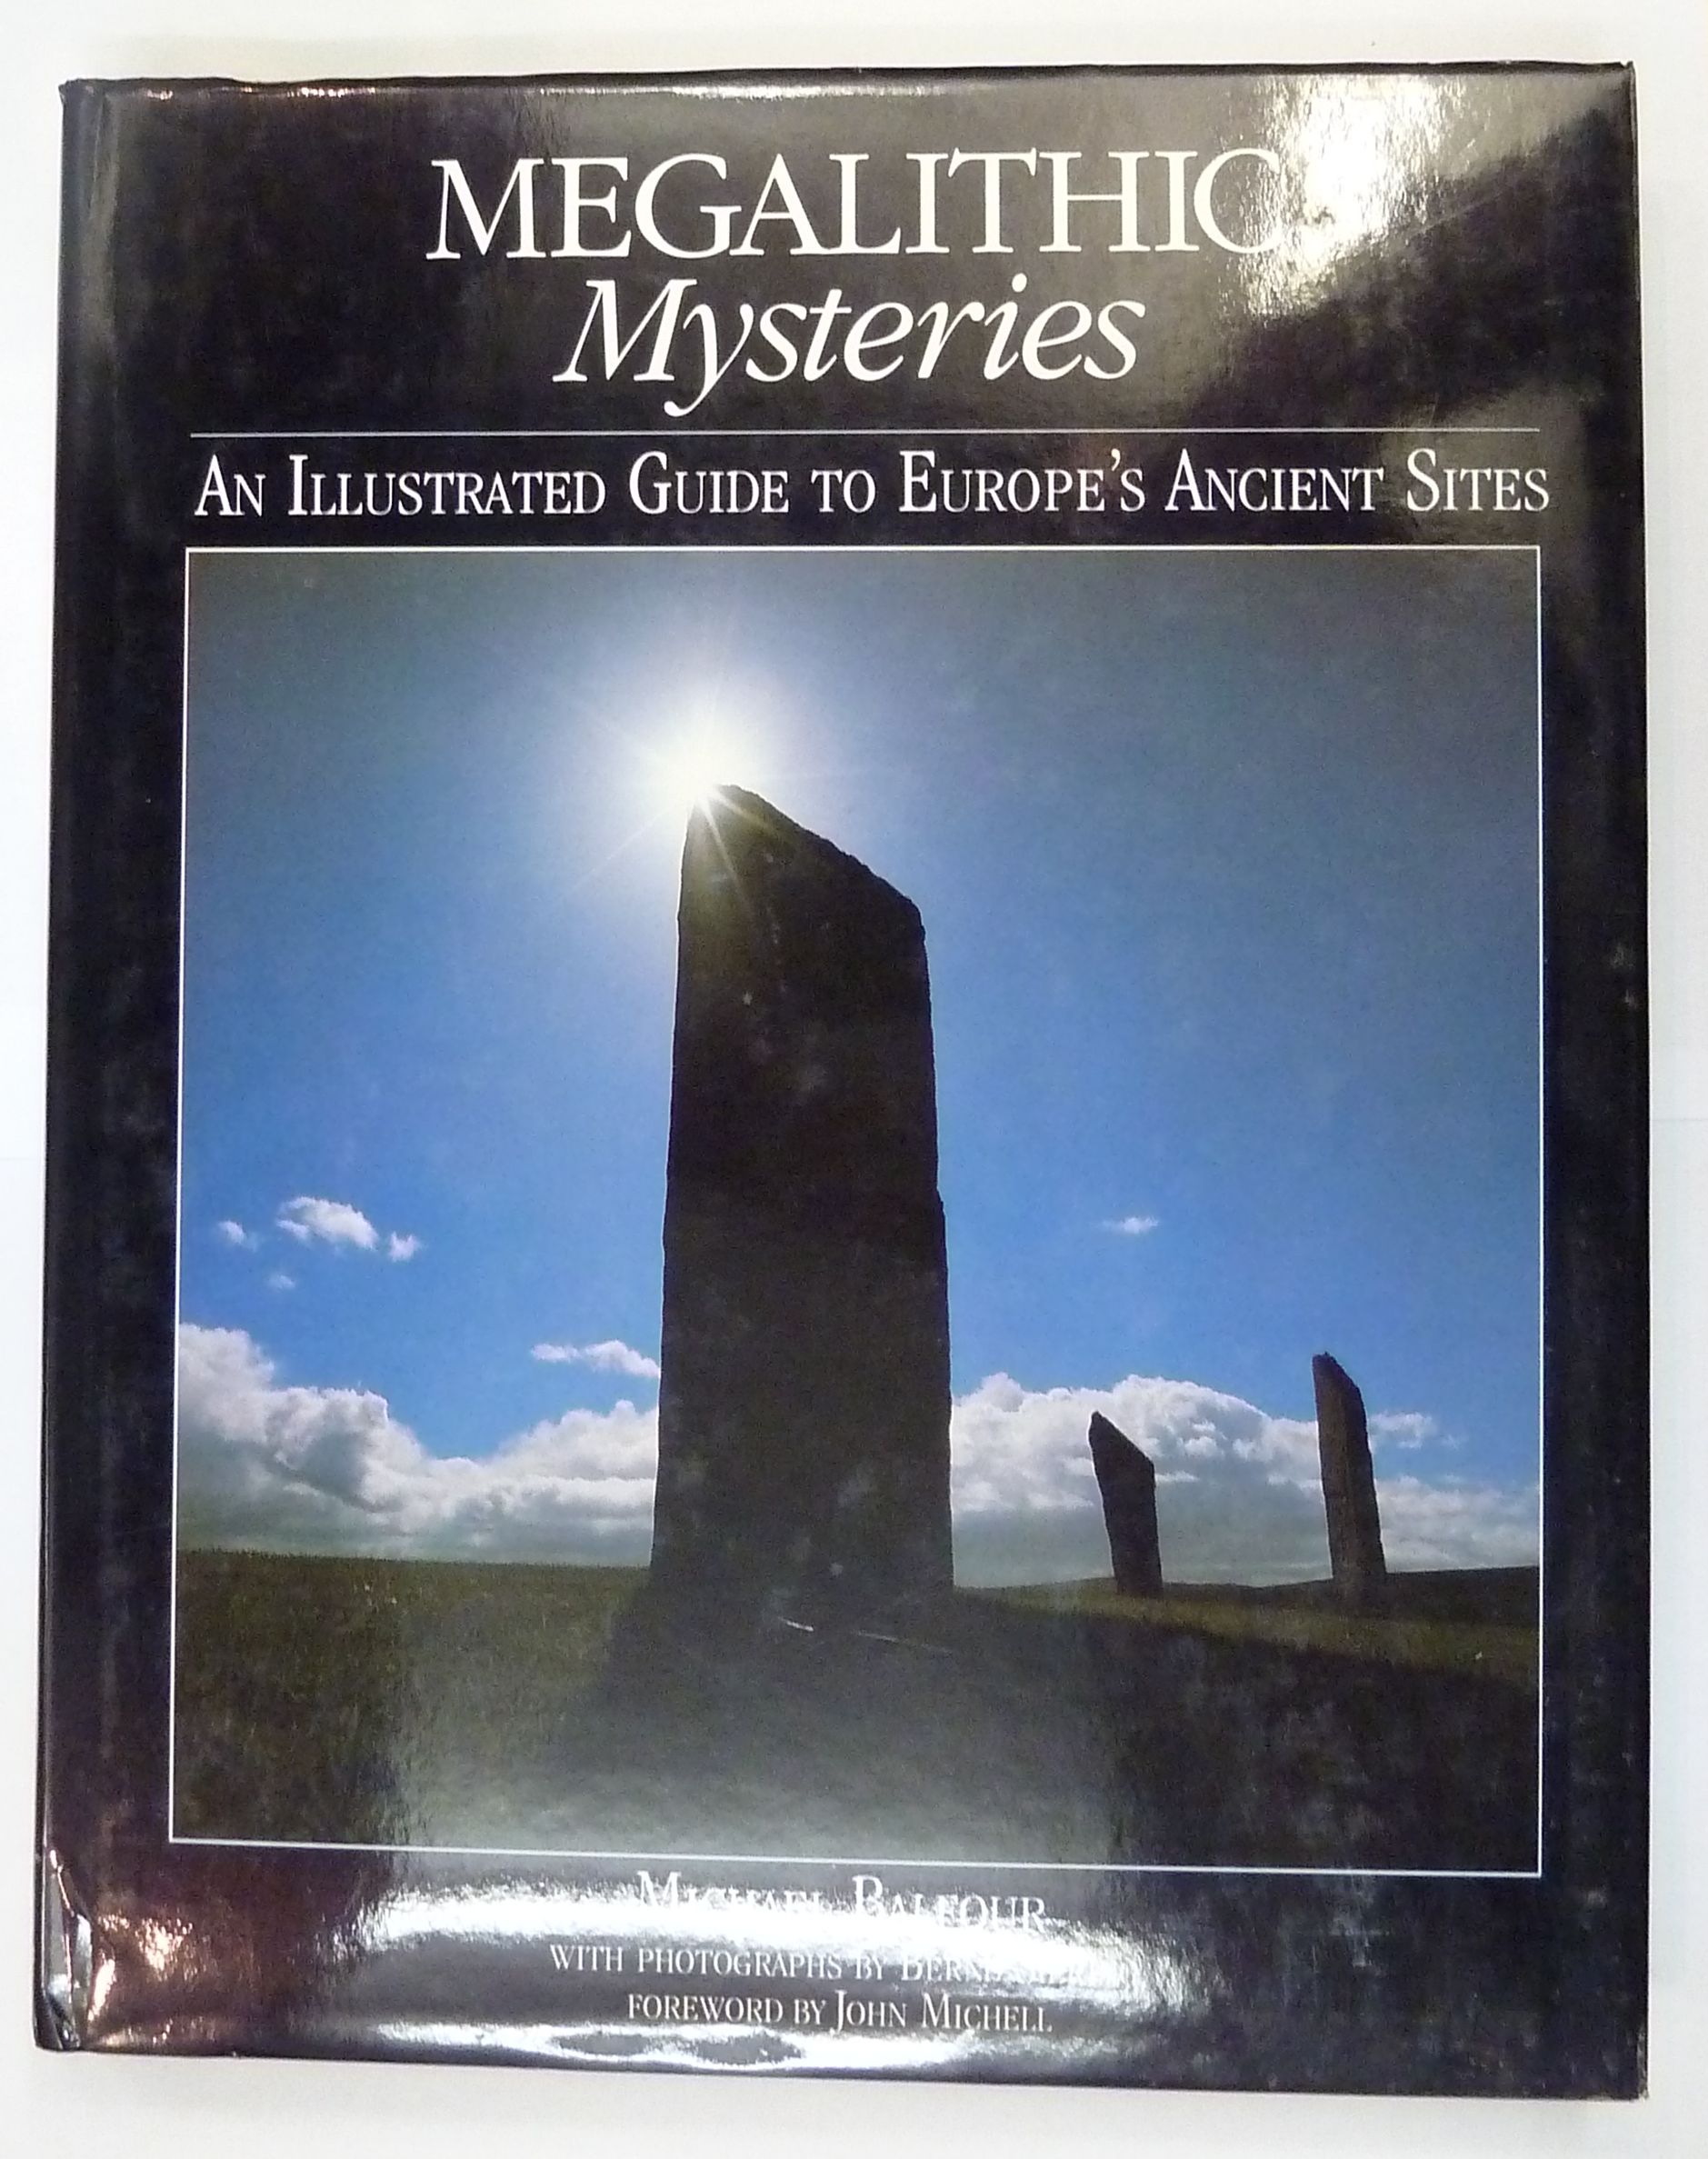 Megalithic Mysteries - Michael Balfour